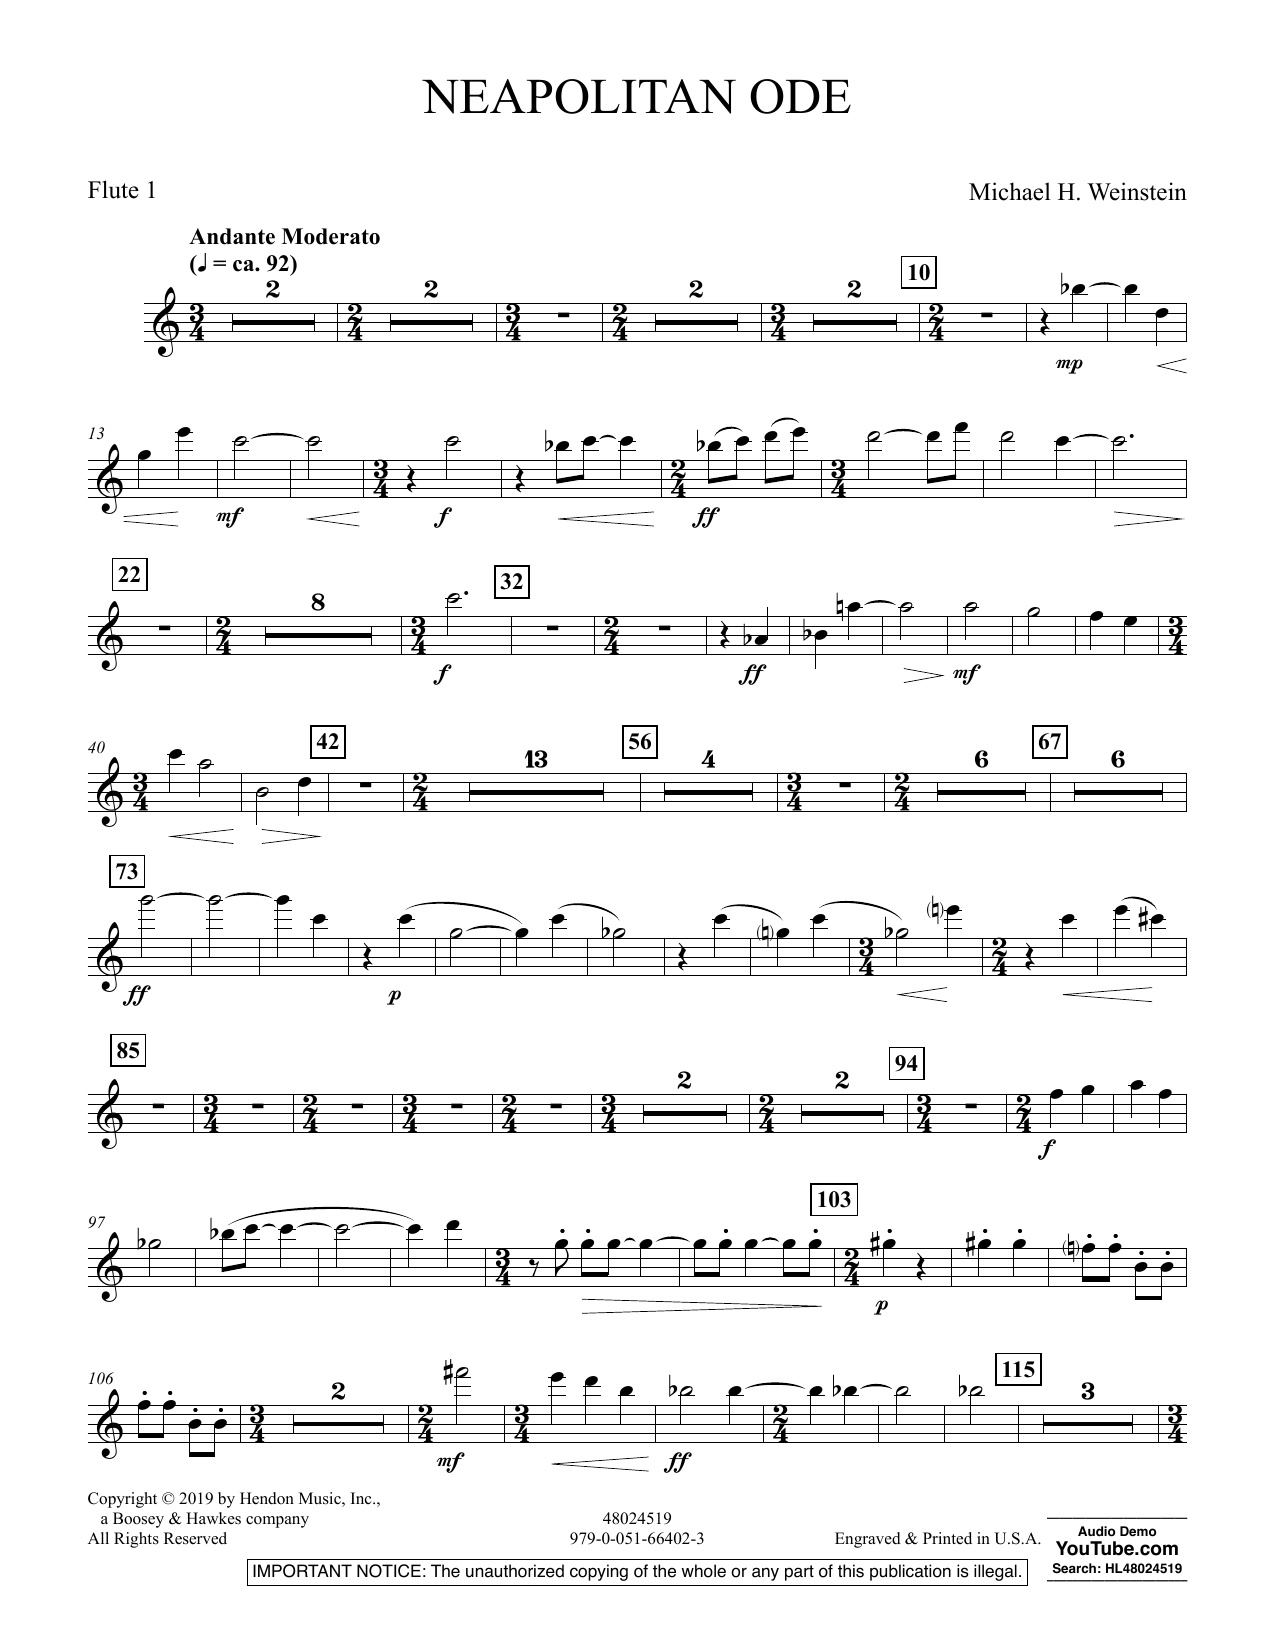 Michael H. Weinstein Neapolitan Ode - Flute 1 sheet music preview music notes and score for Concert Band including 2 page(s)